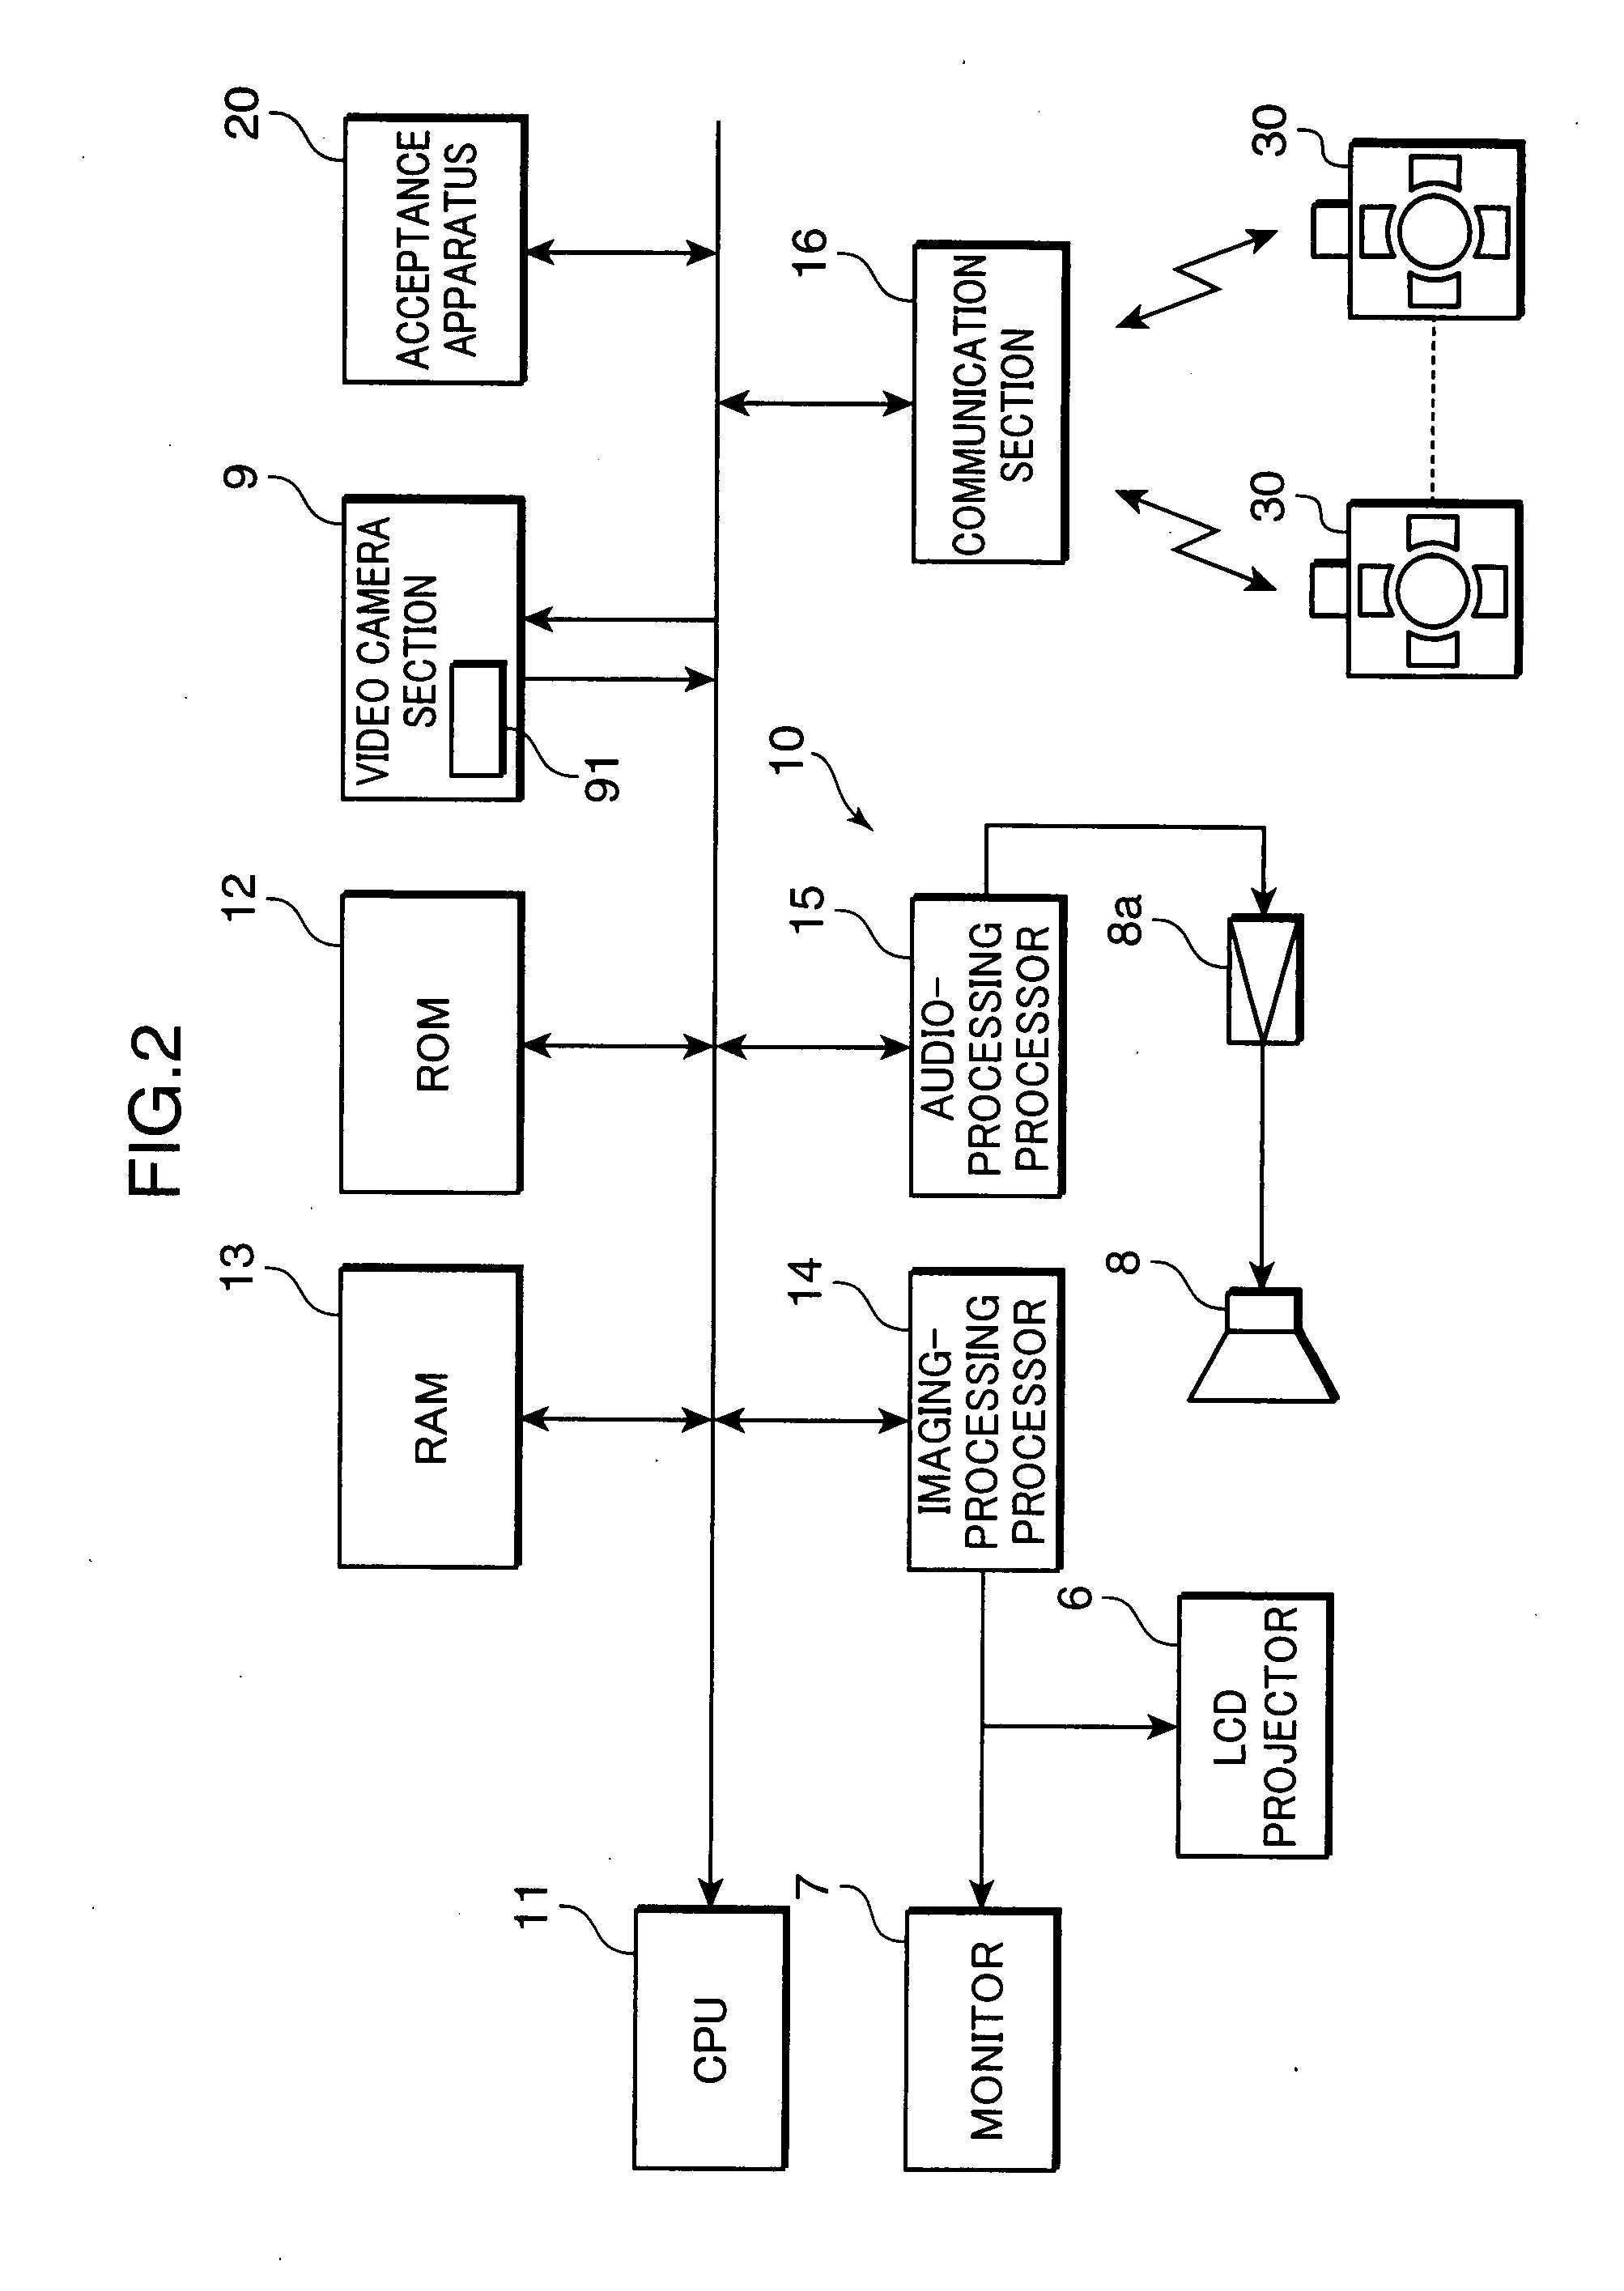 Movement Information Processing System